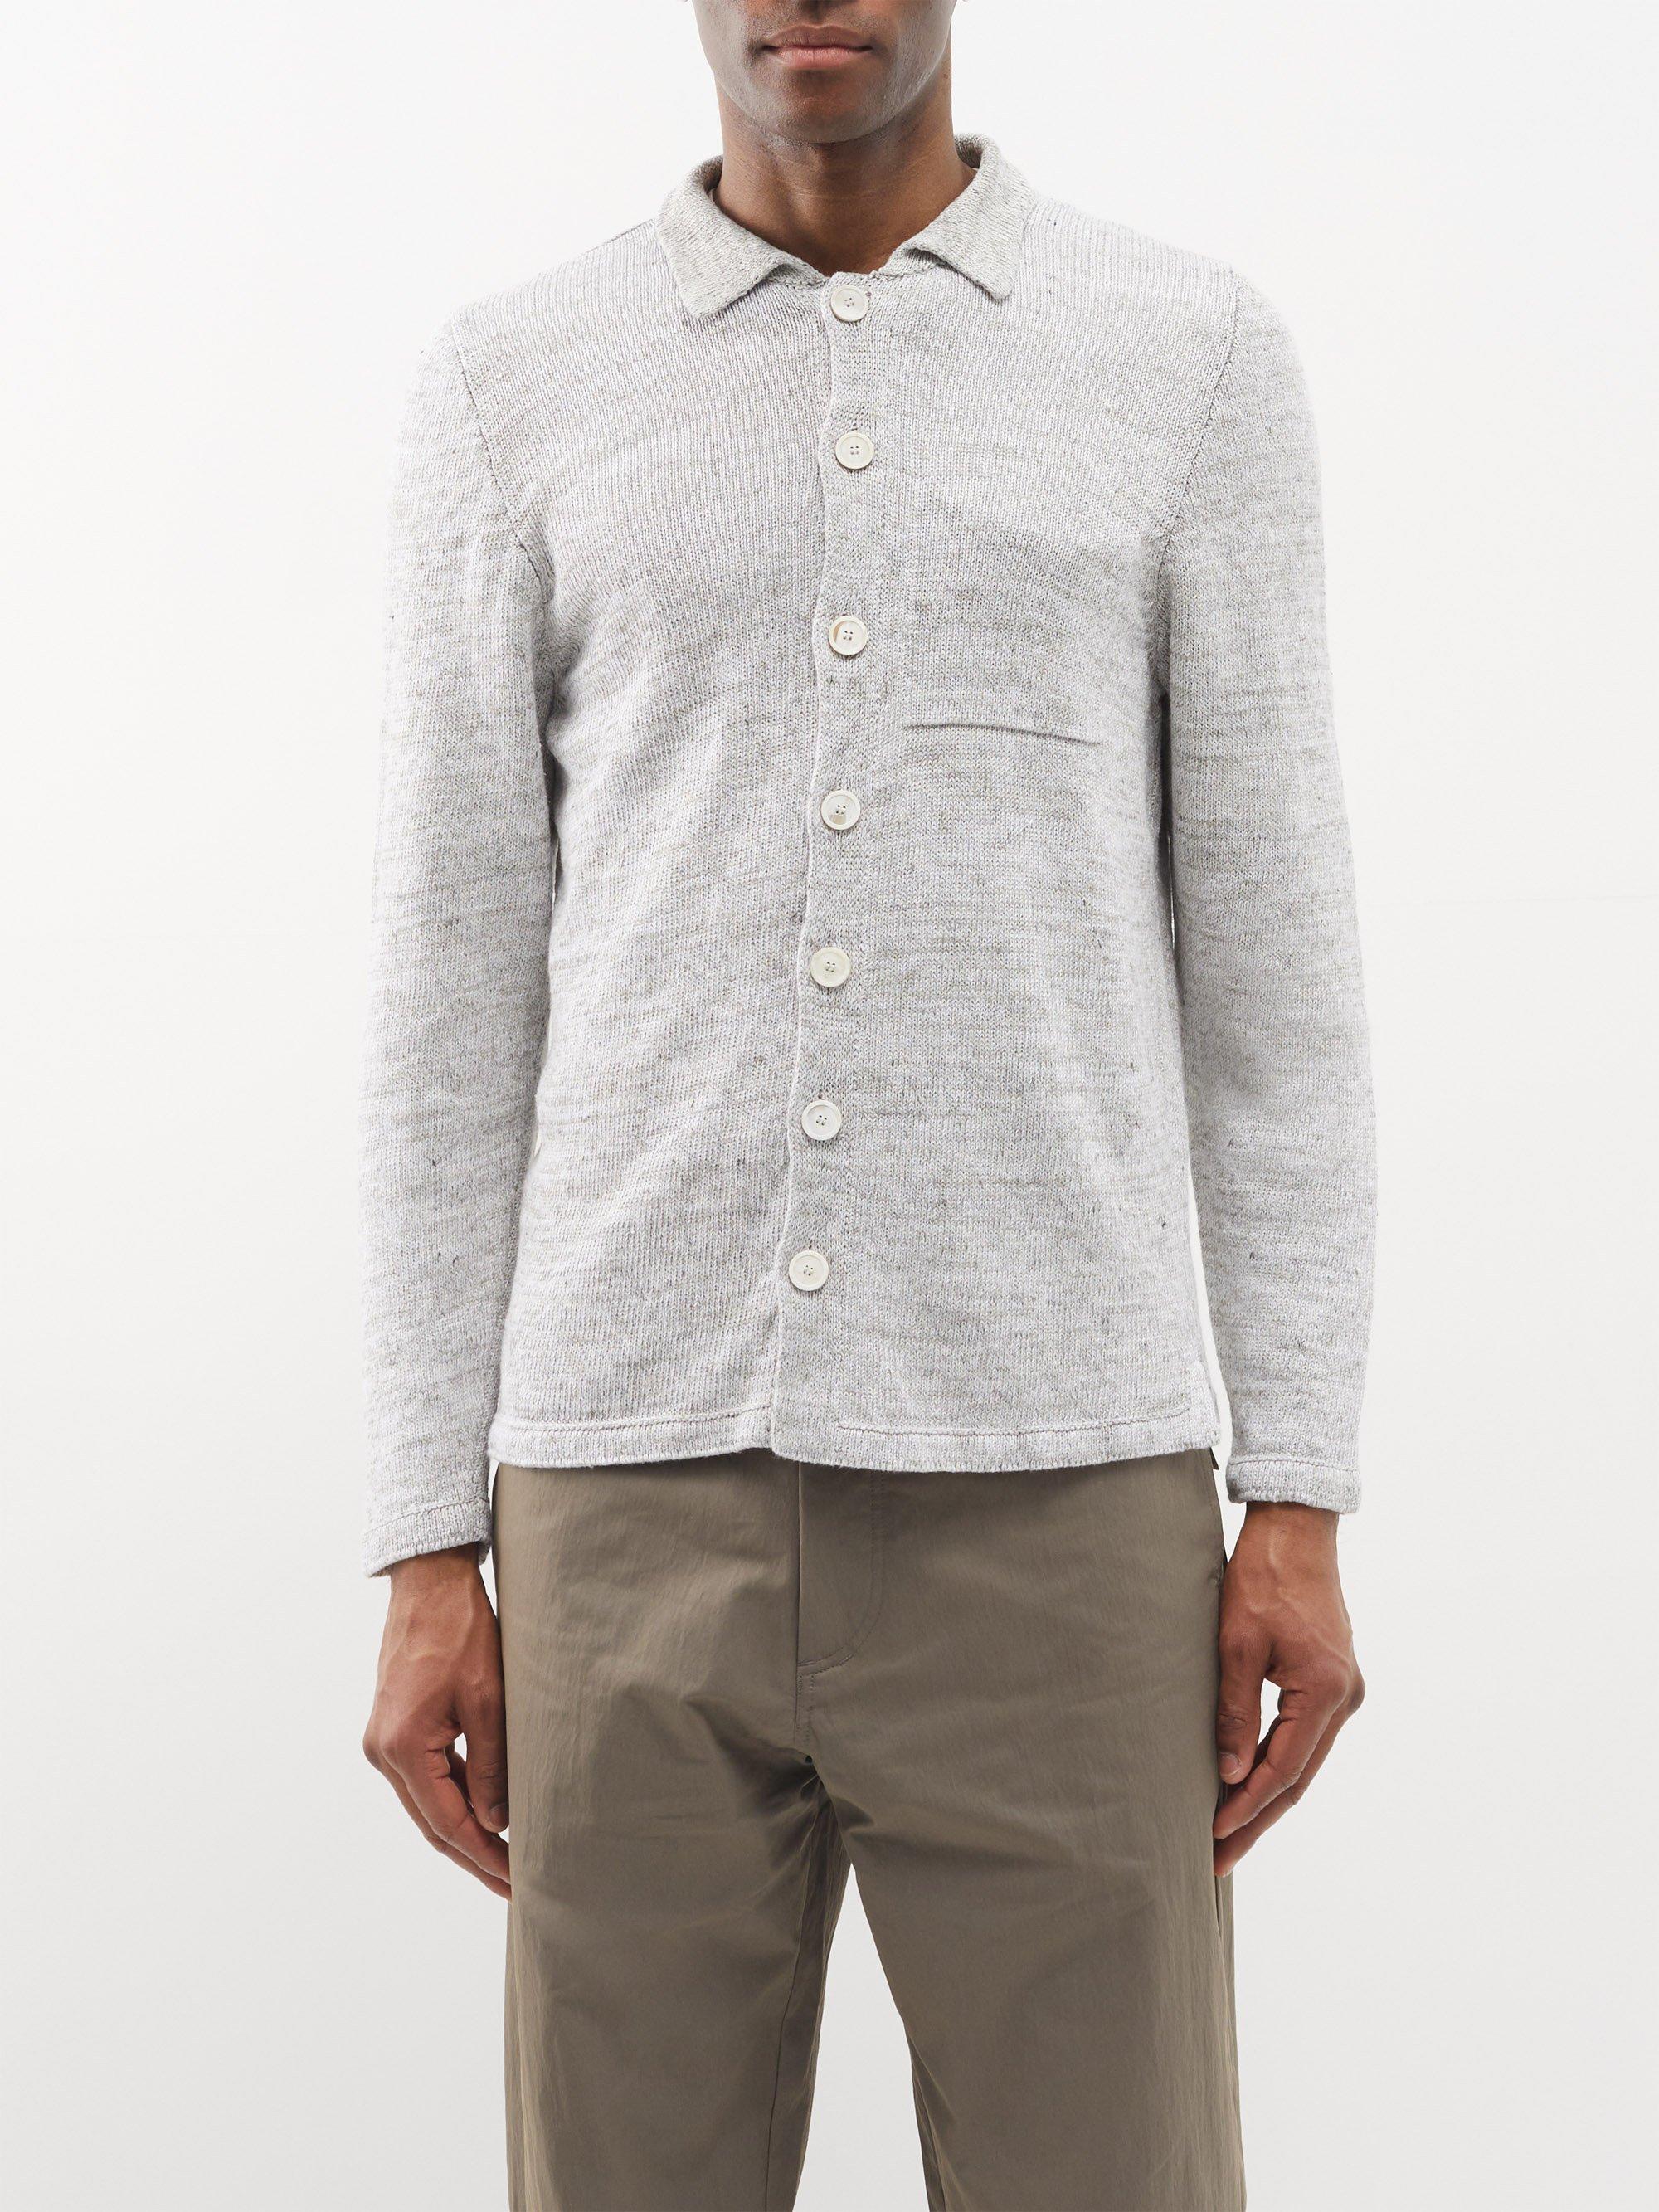 Inis Meáin Collared Washed-linen Cardigan in Gray for Men | Lyst